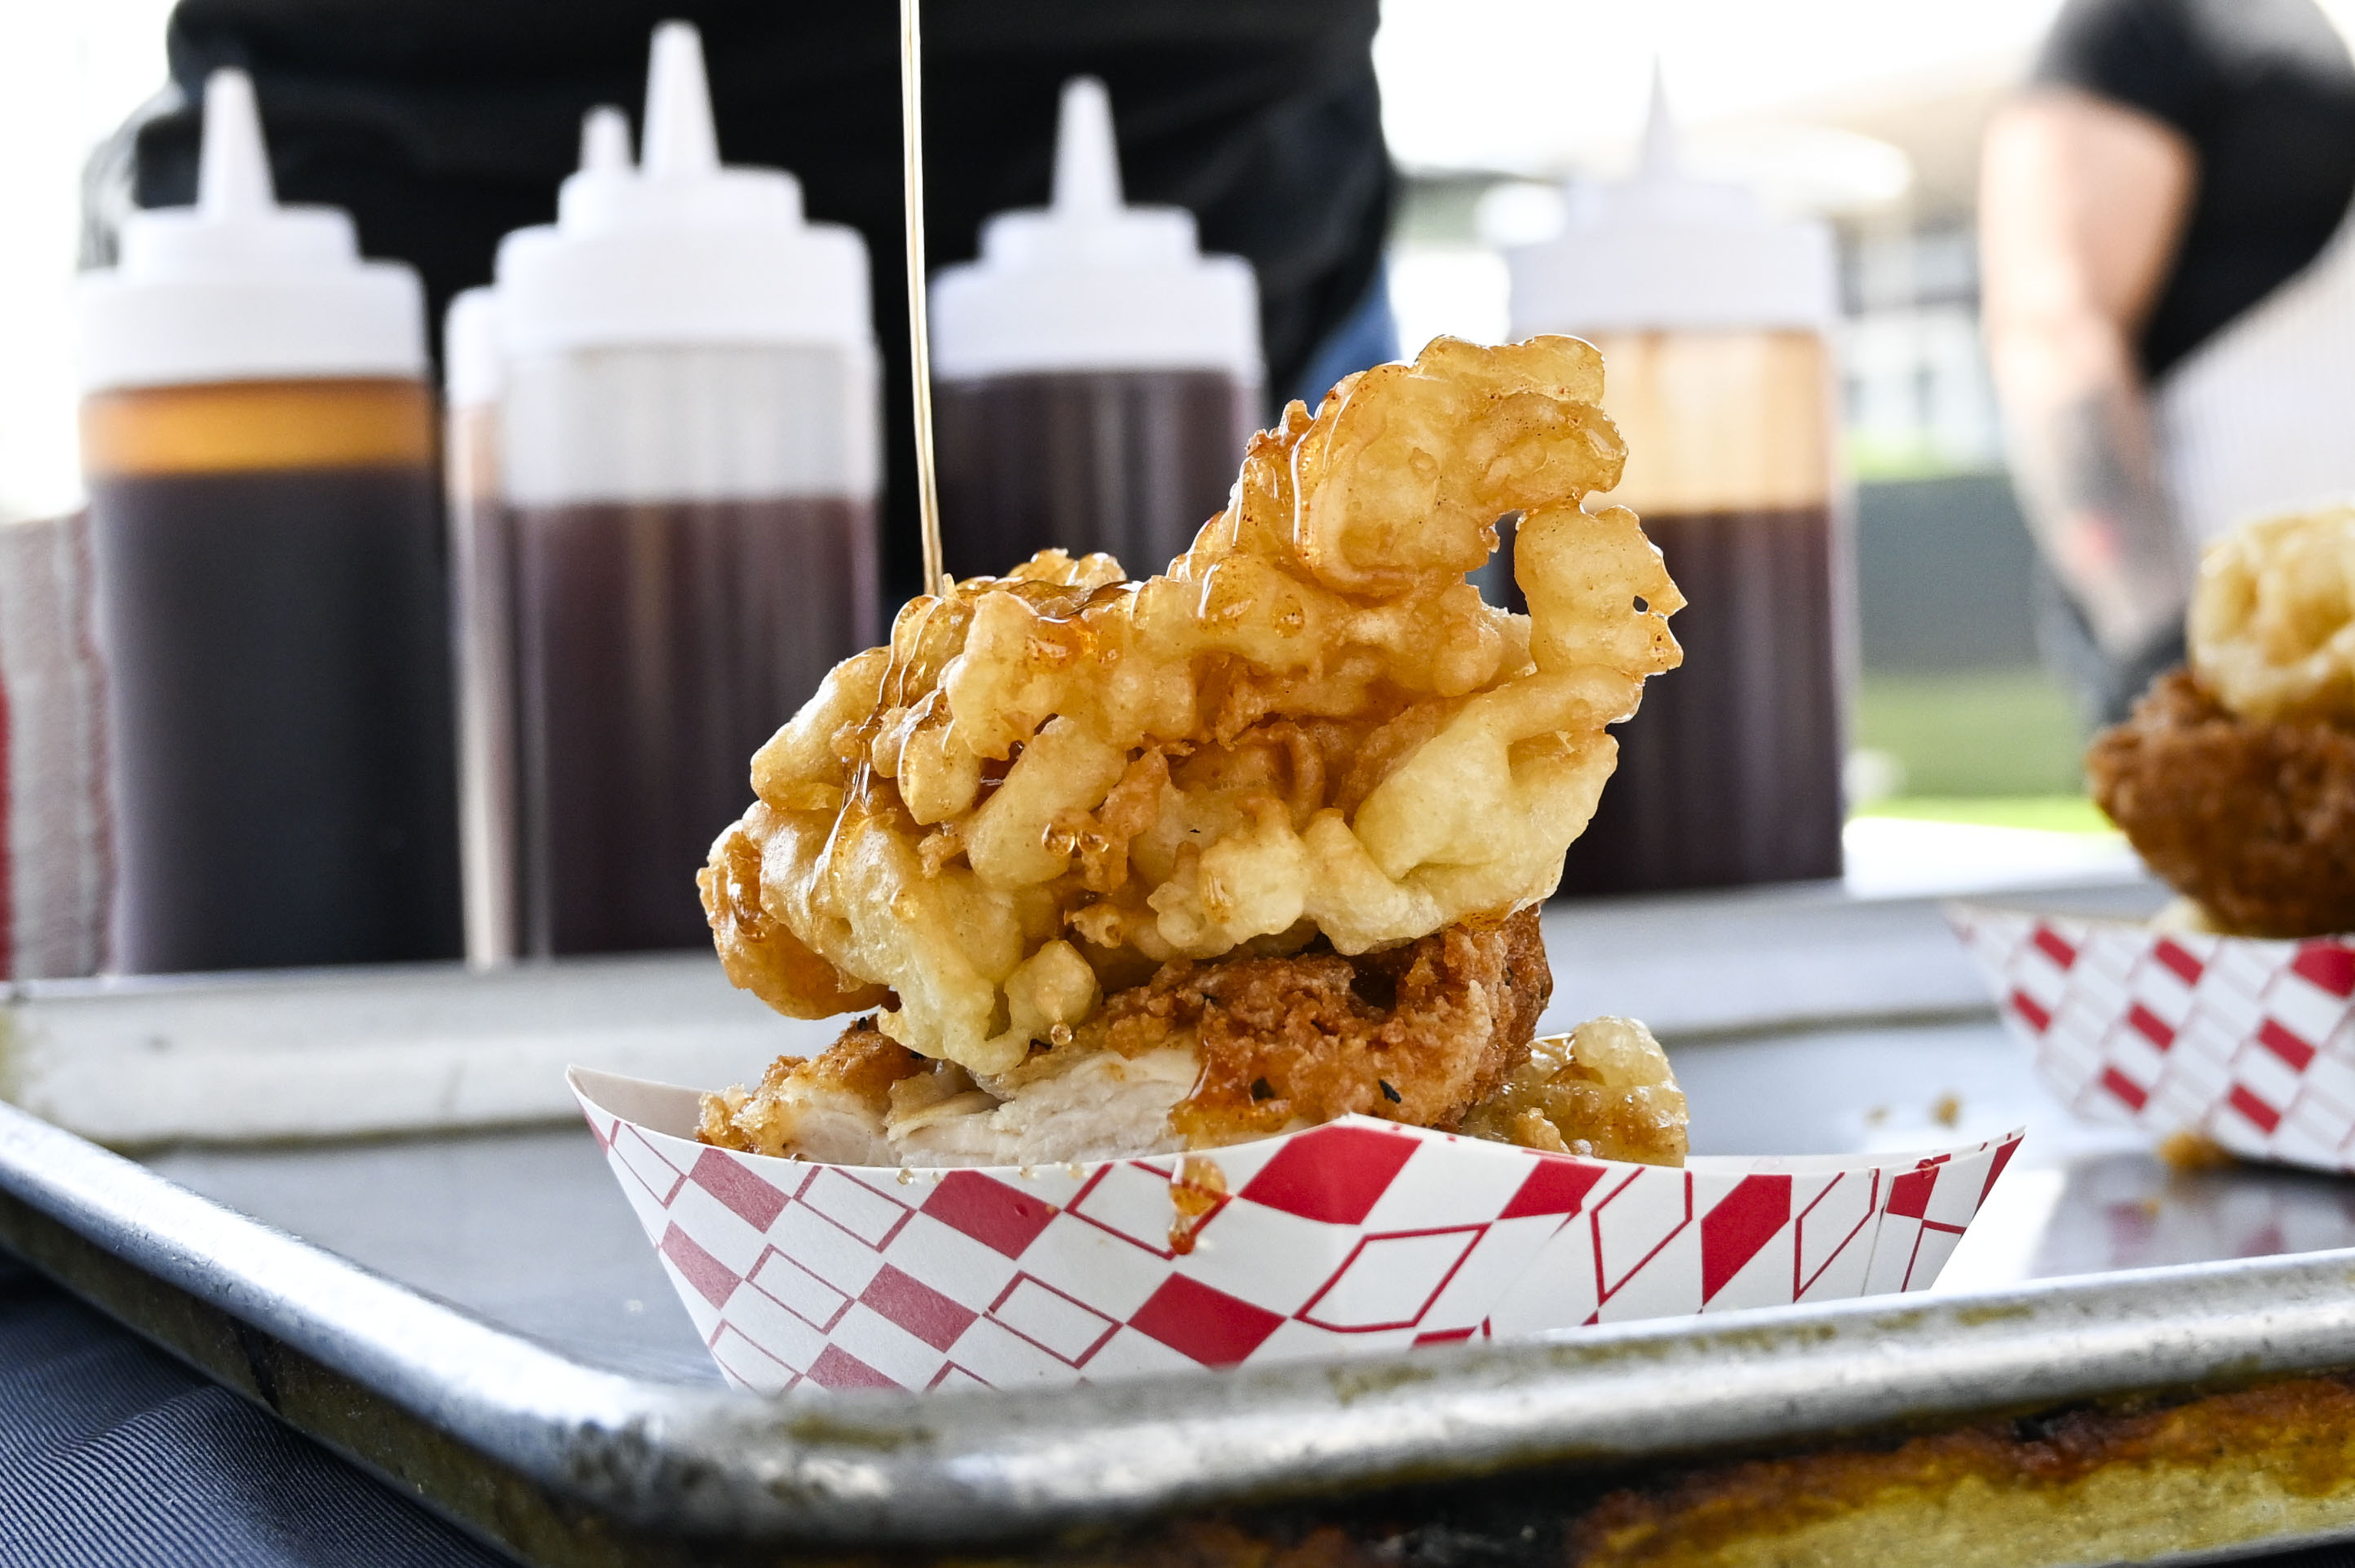 Hot honey drips onto a fried chicken and funnel cake...